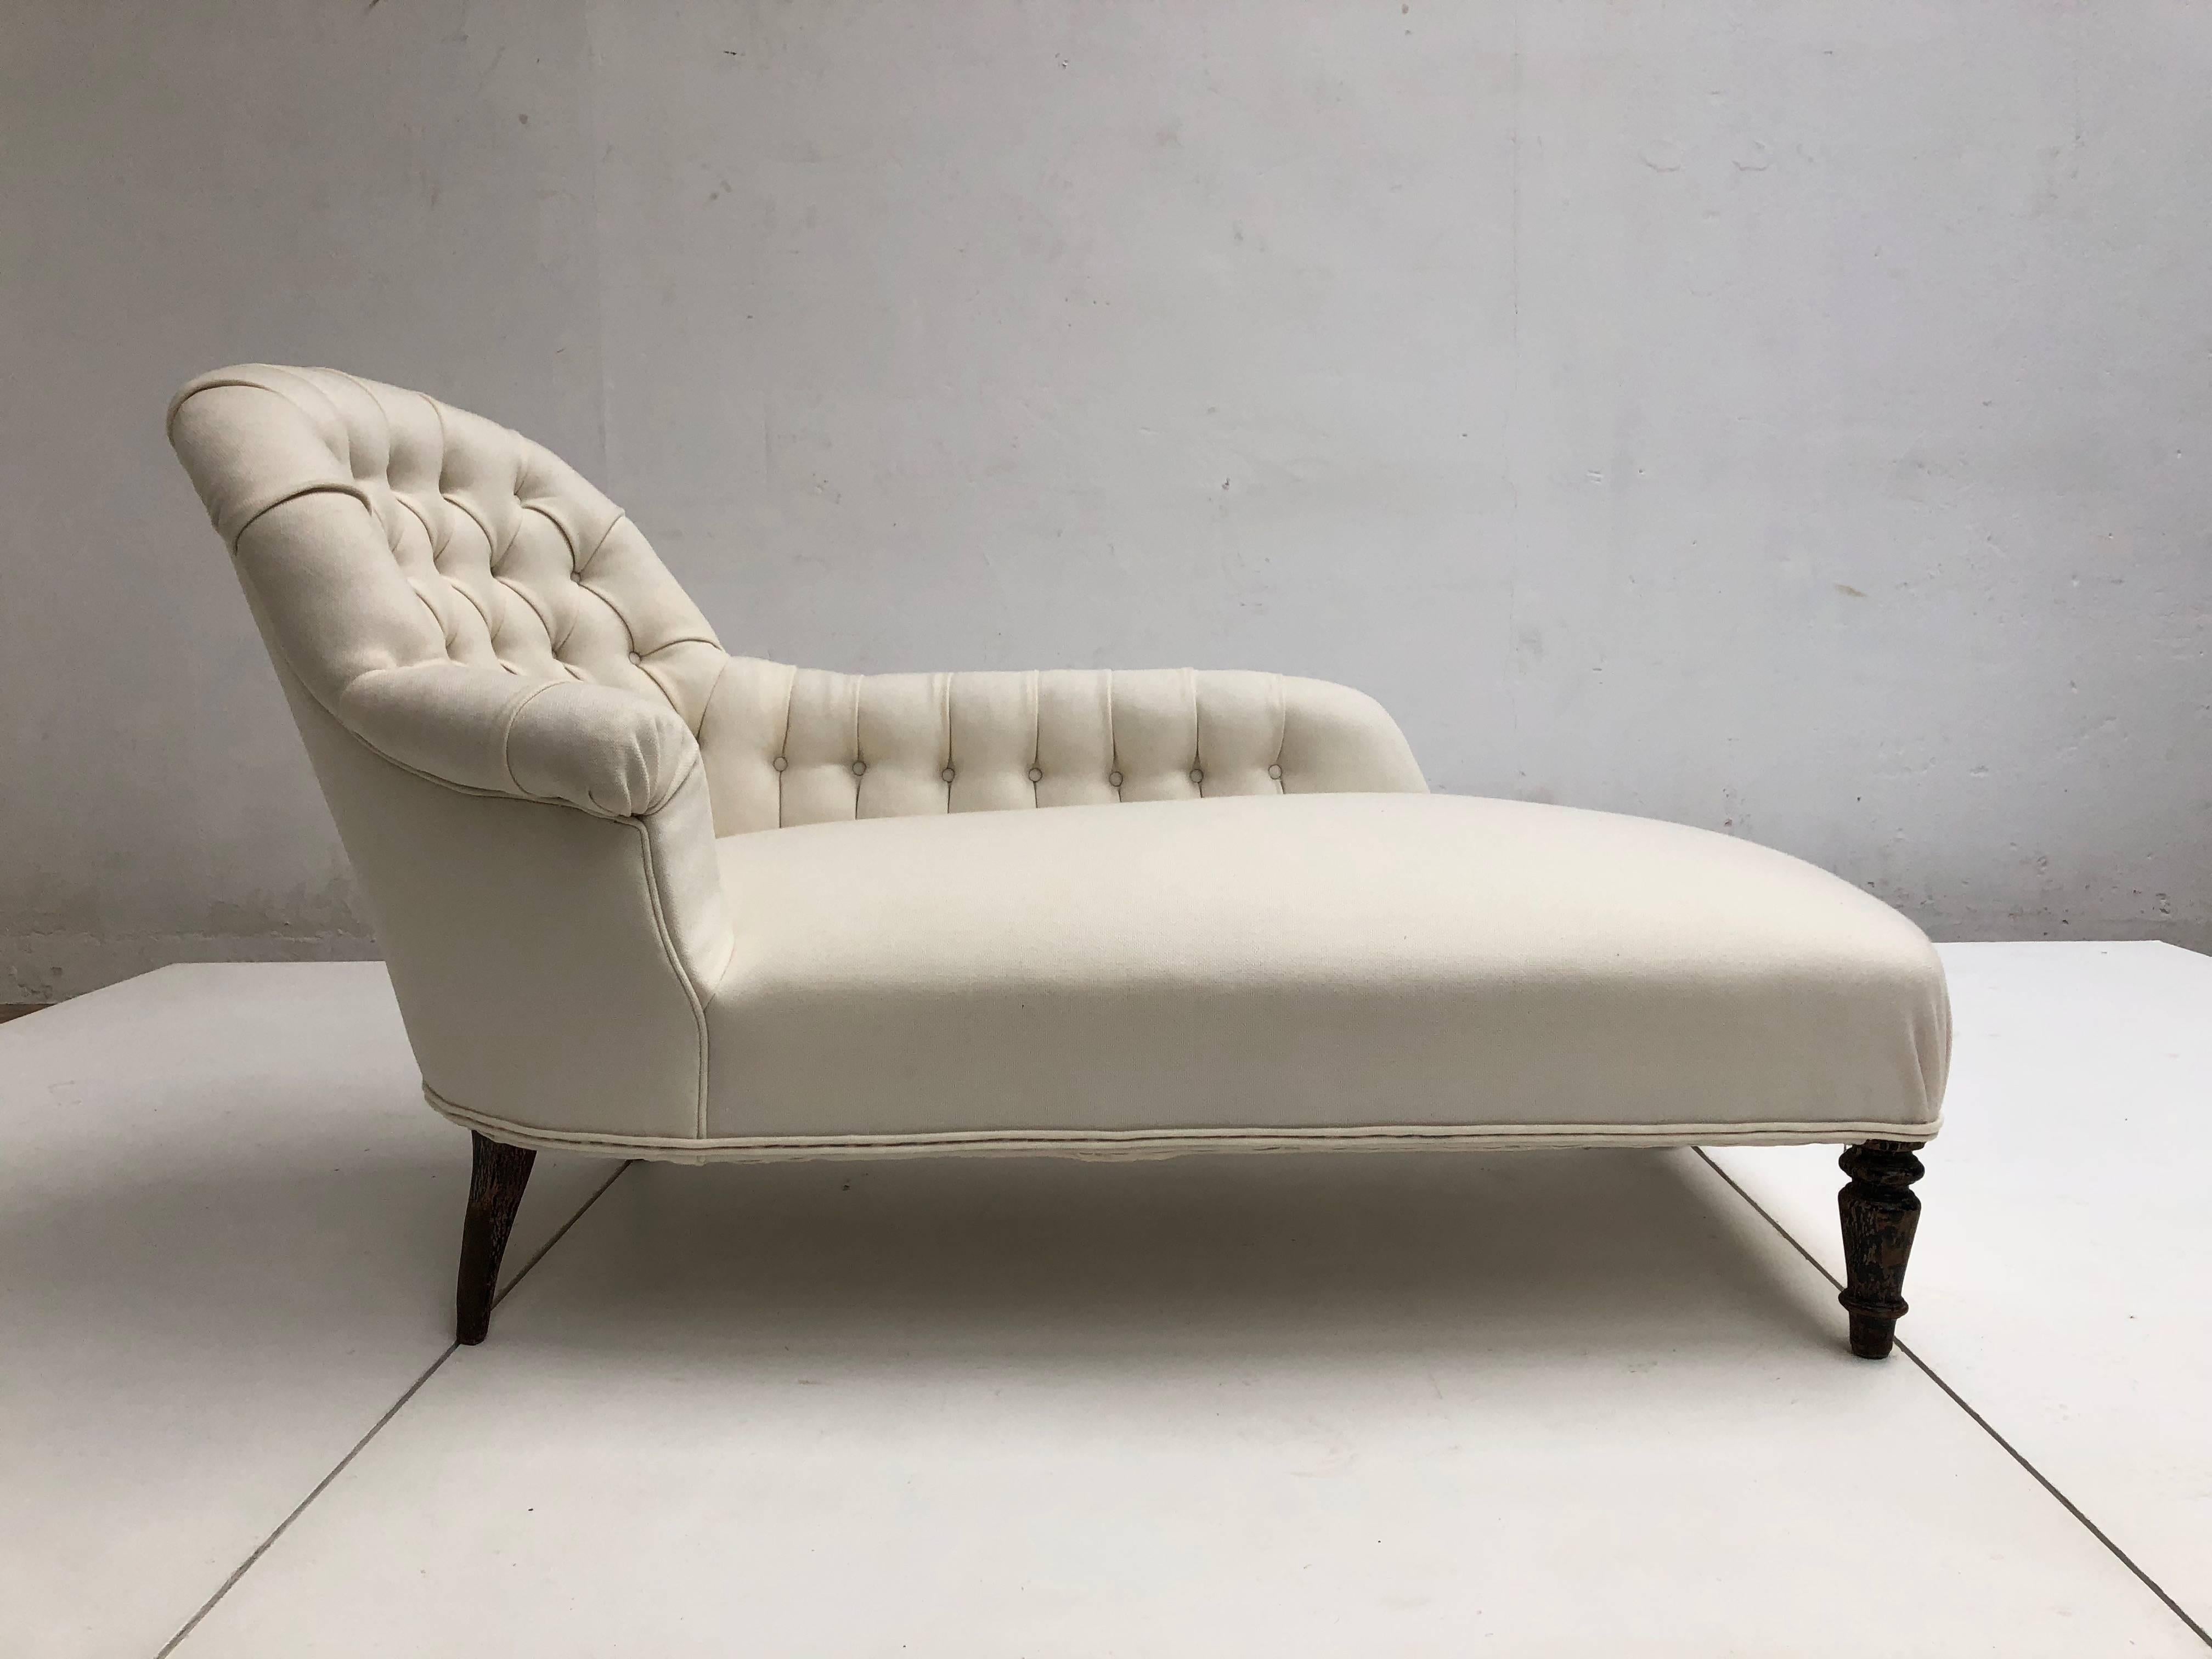 French Méridienne / Chaise Longue circa 1850 Re-Upholstered in De Ploeg Wool 1